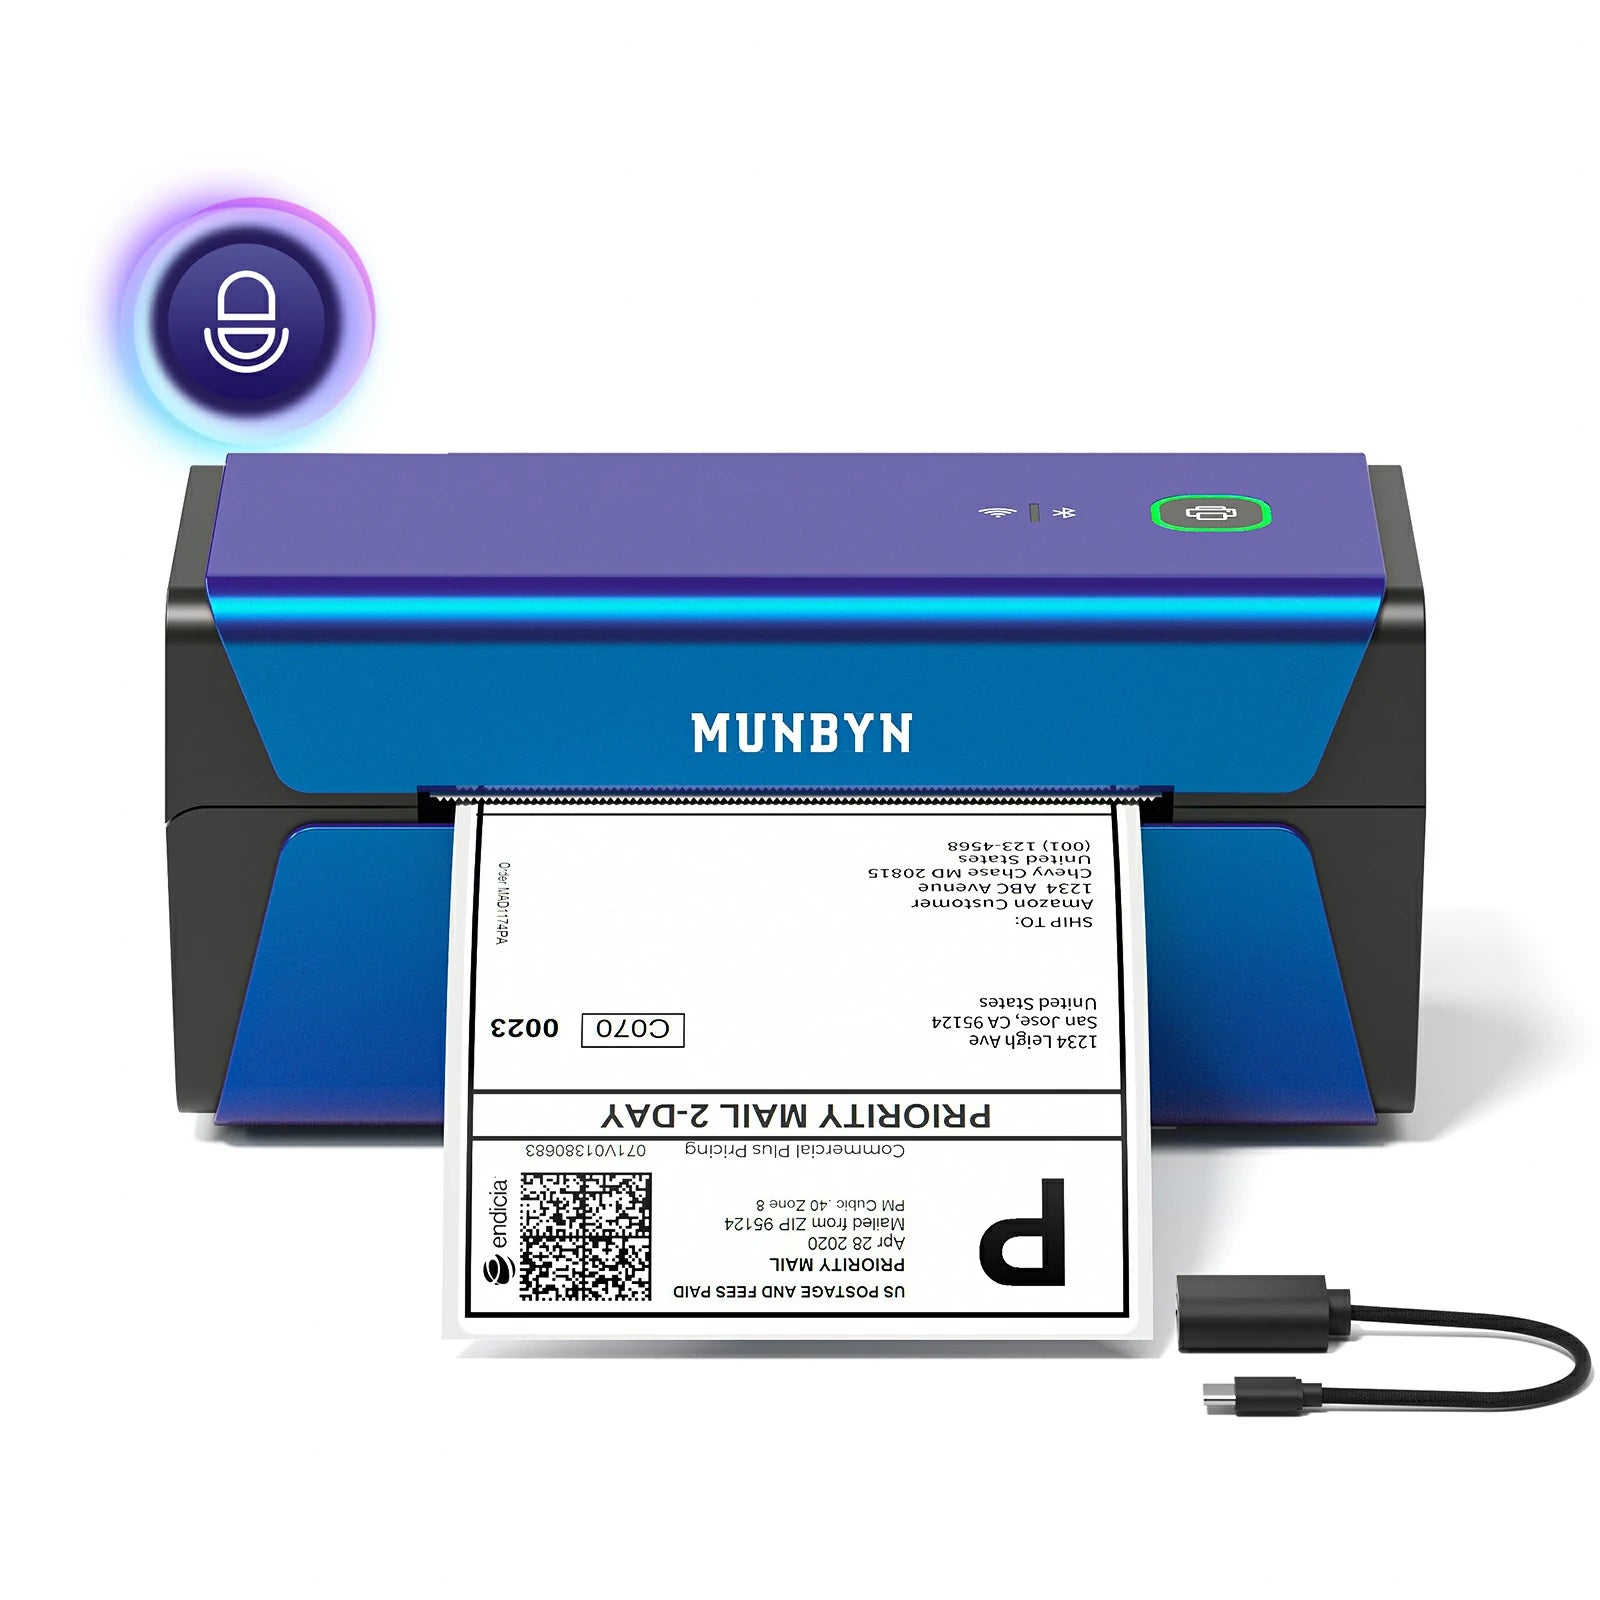 MUNBYN Voice Controlled Wireless Thermal Label Printer P44S